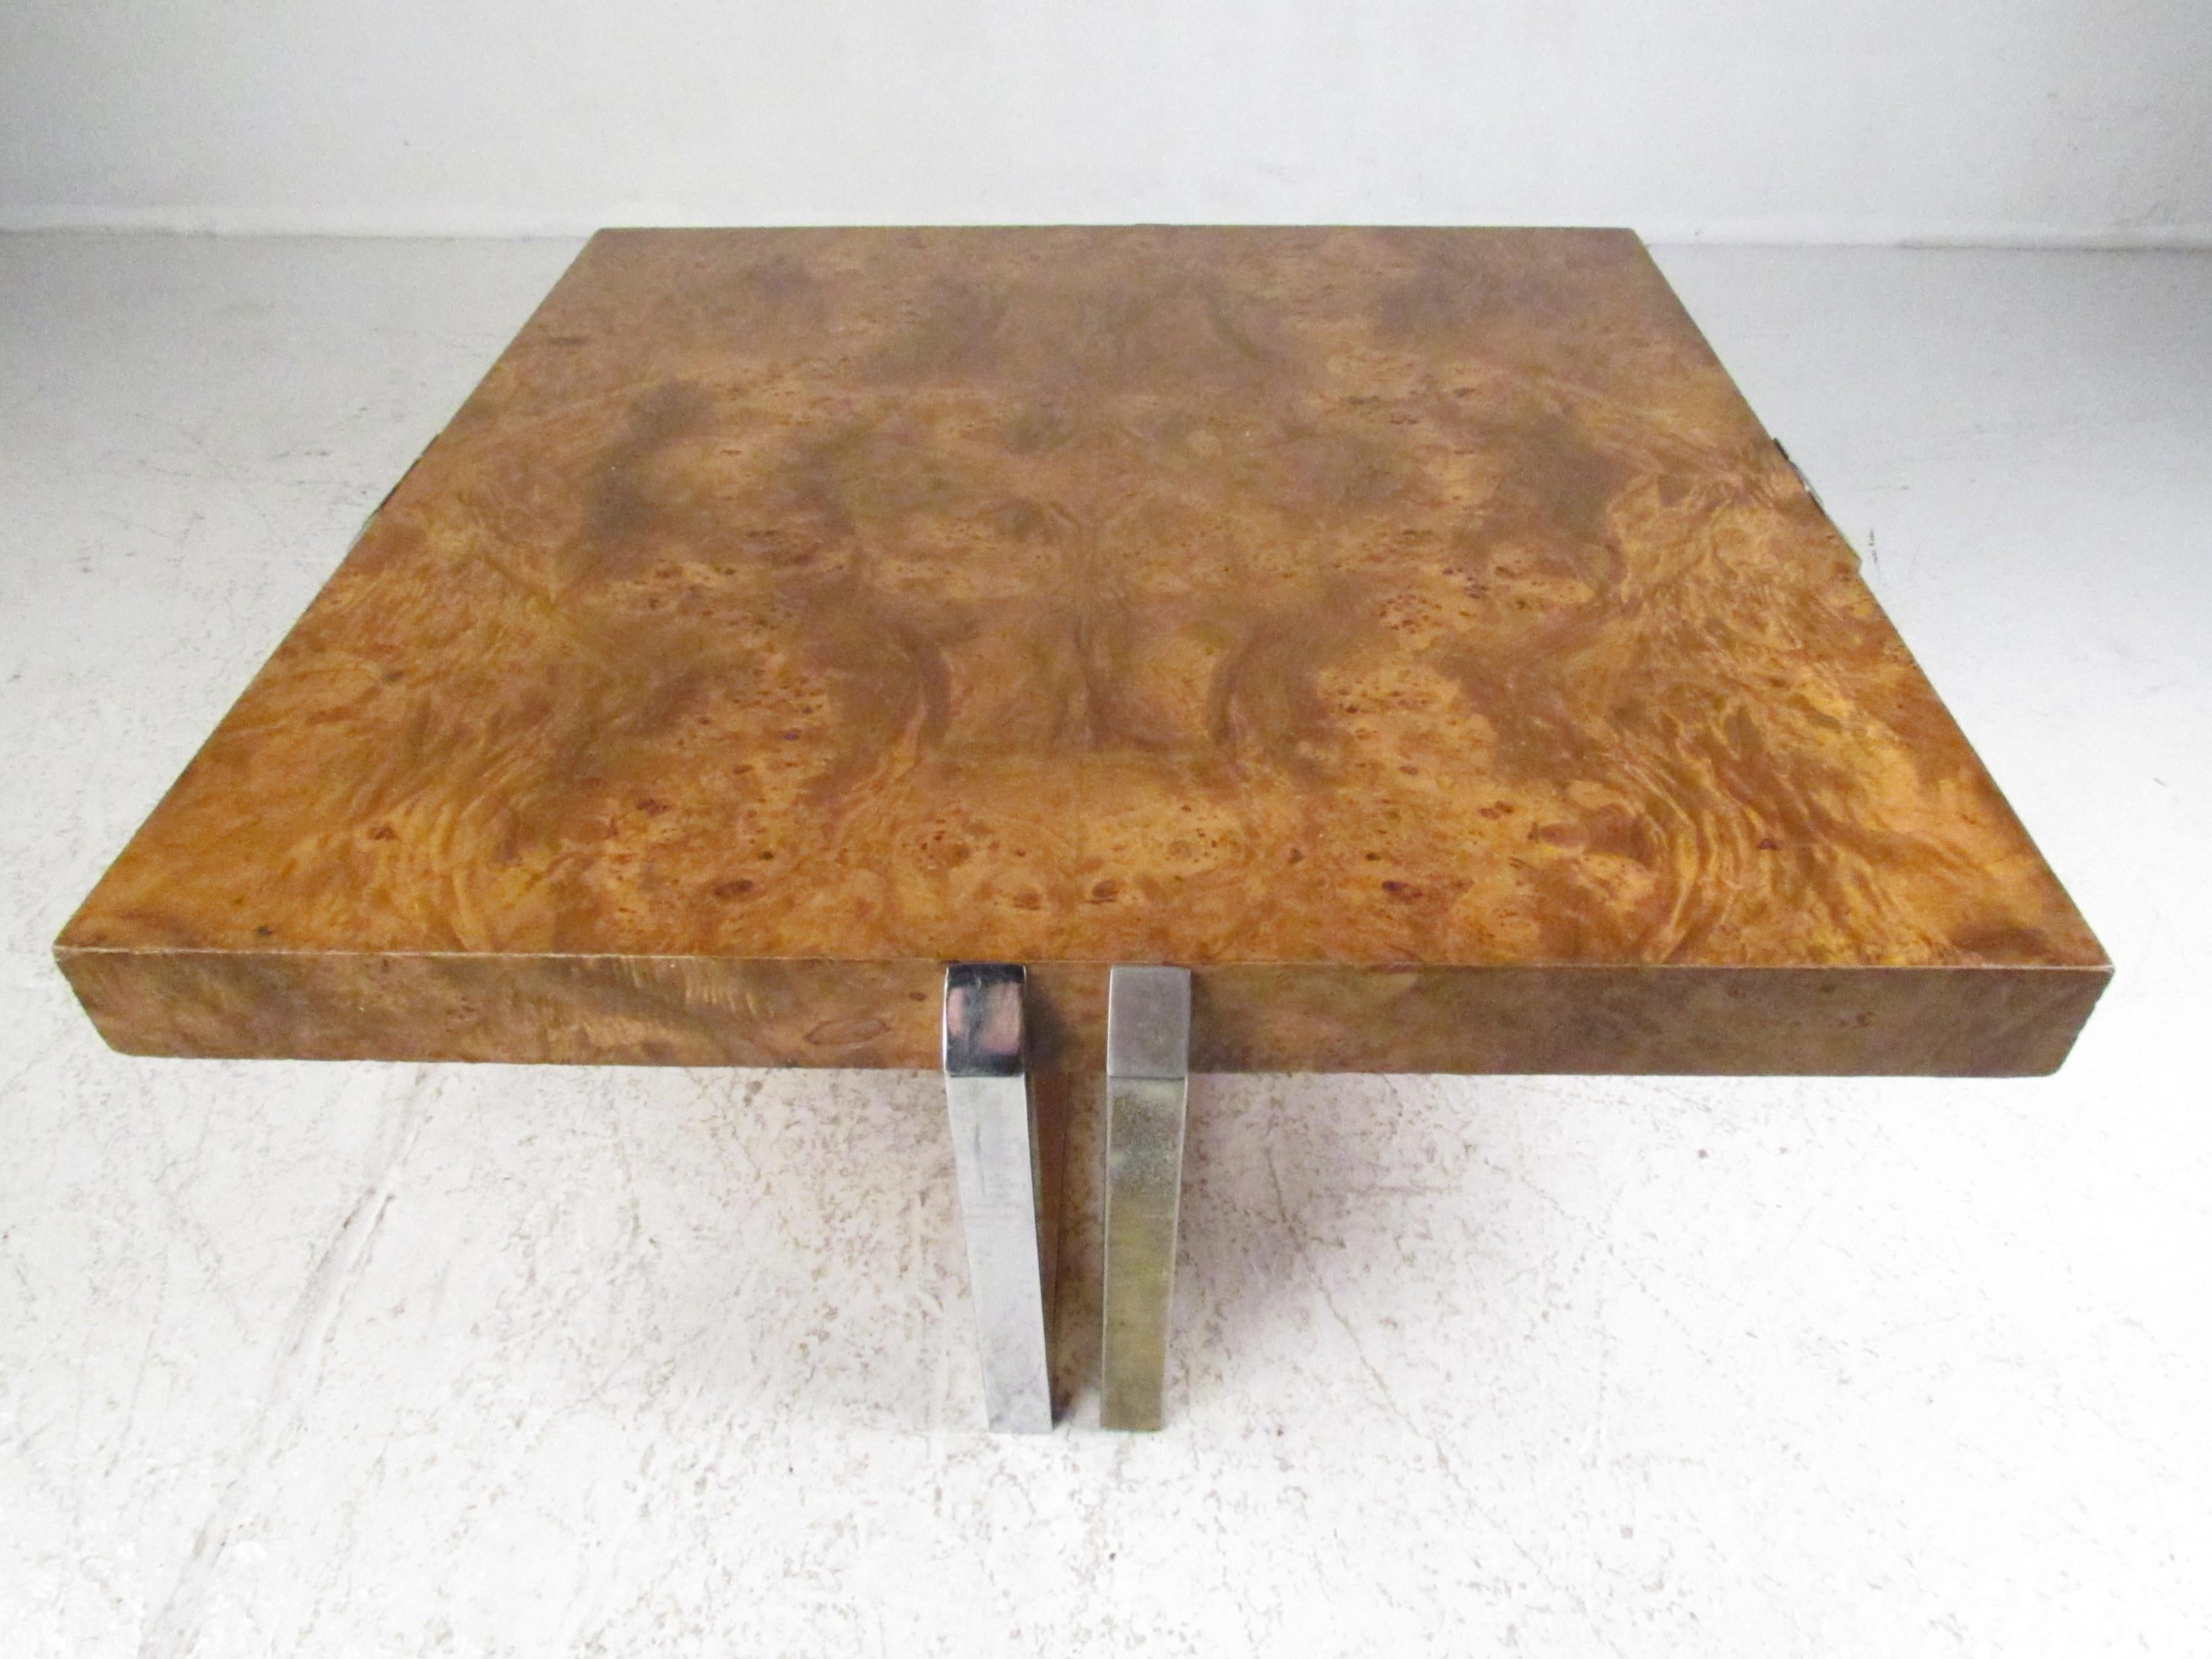 This stunning vintage modern coffee table features a unique two-tone 